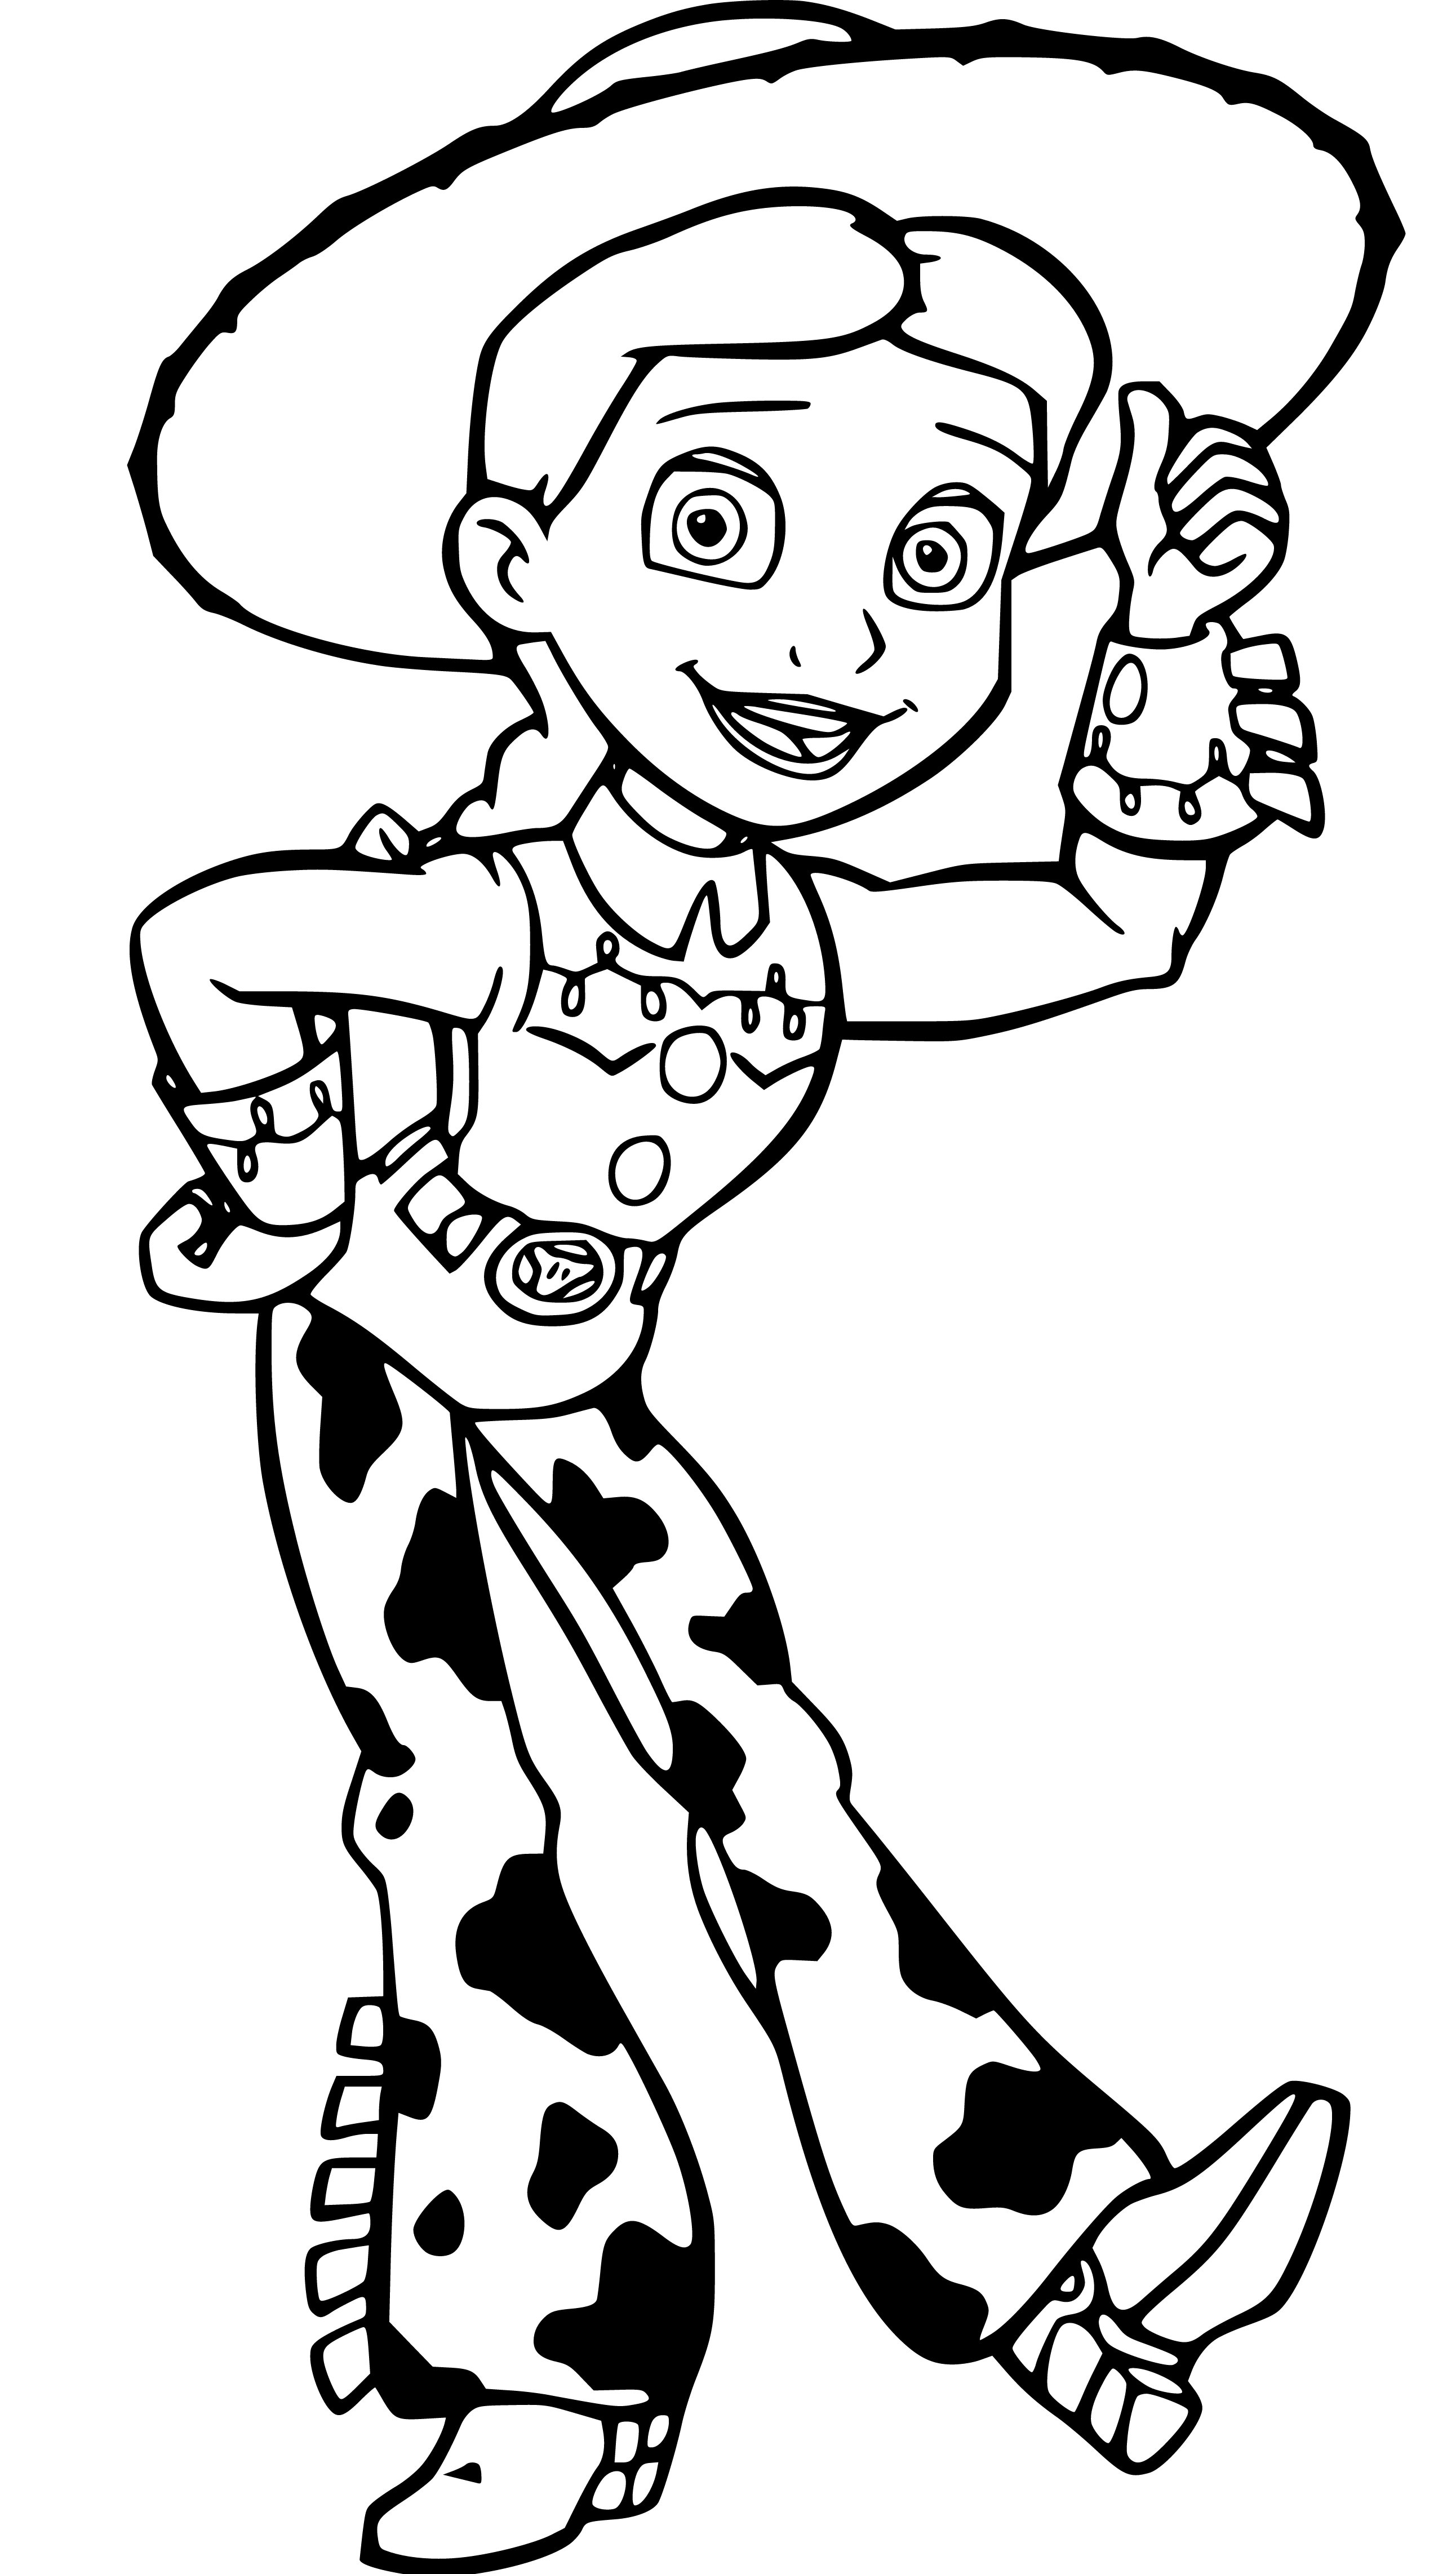 Toy Story Cowgirl Jessie Coloring Page for Kids Printable - SheetalColor.com